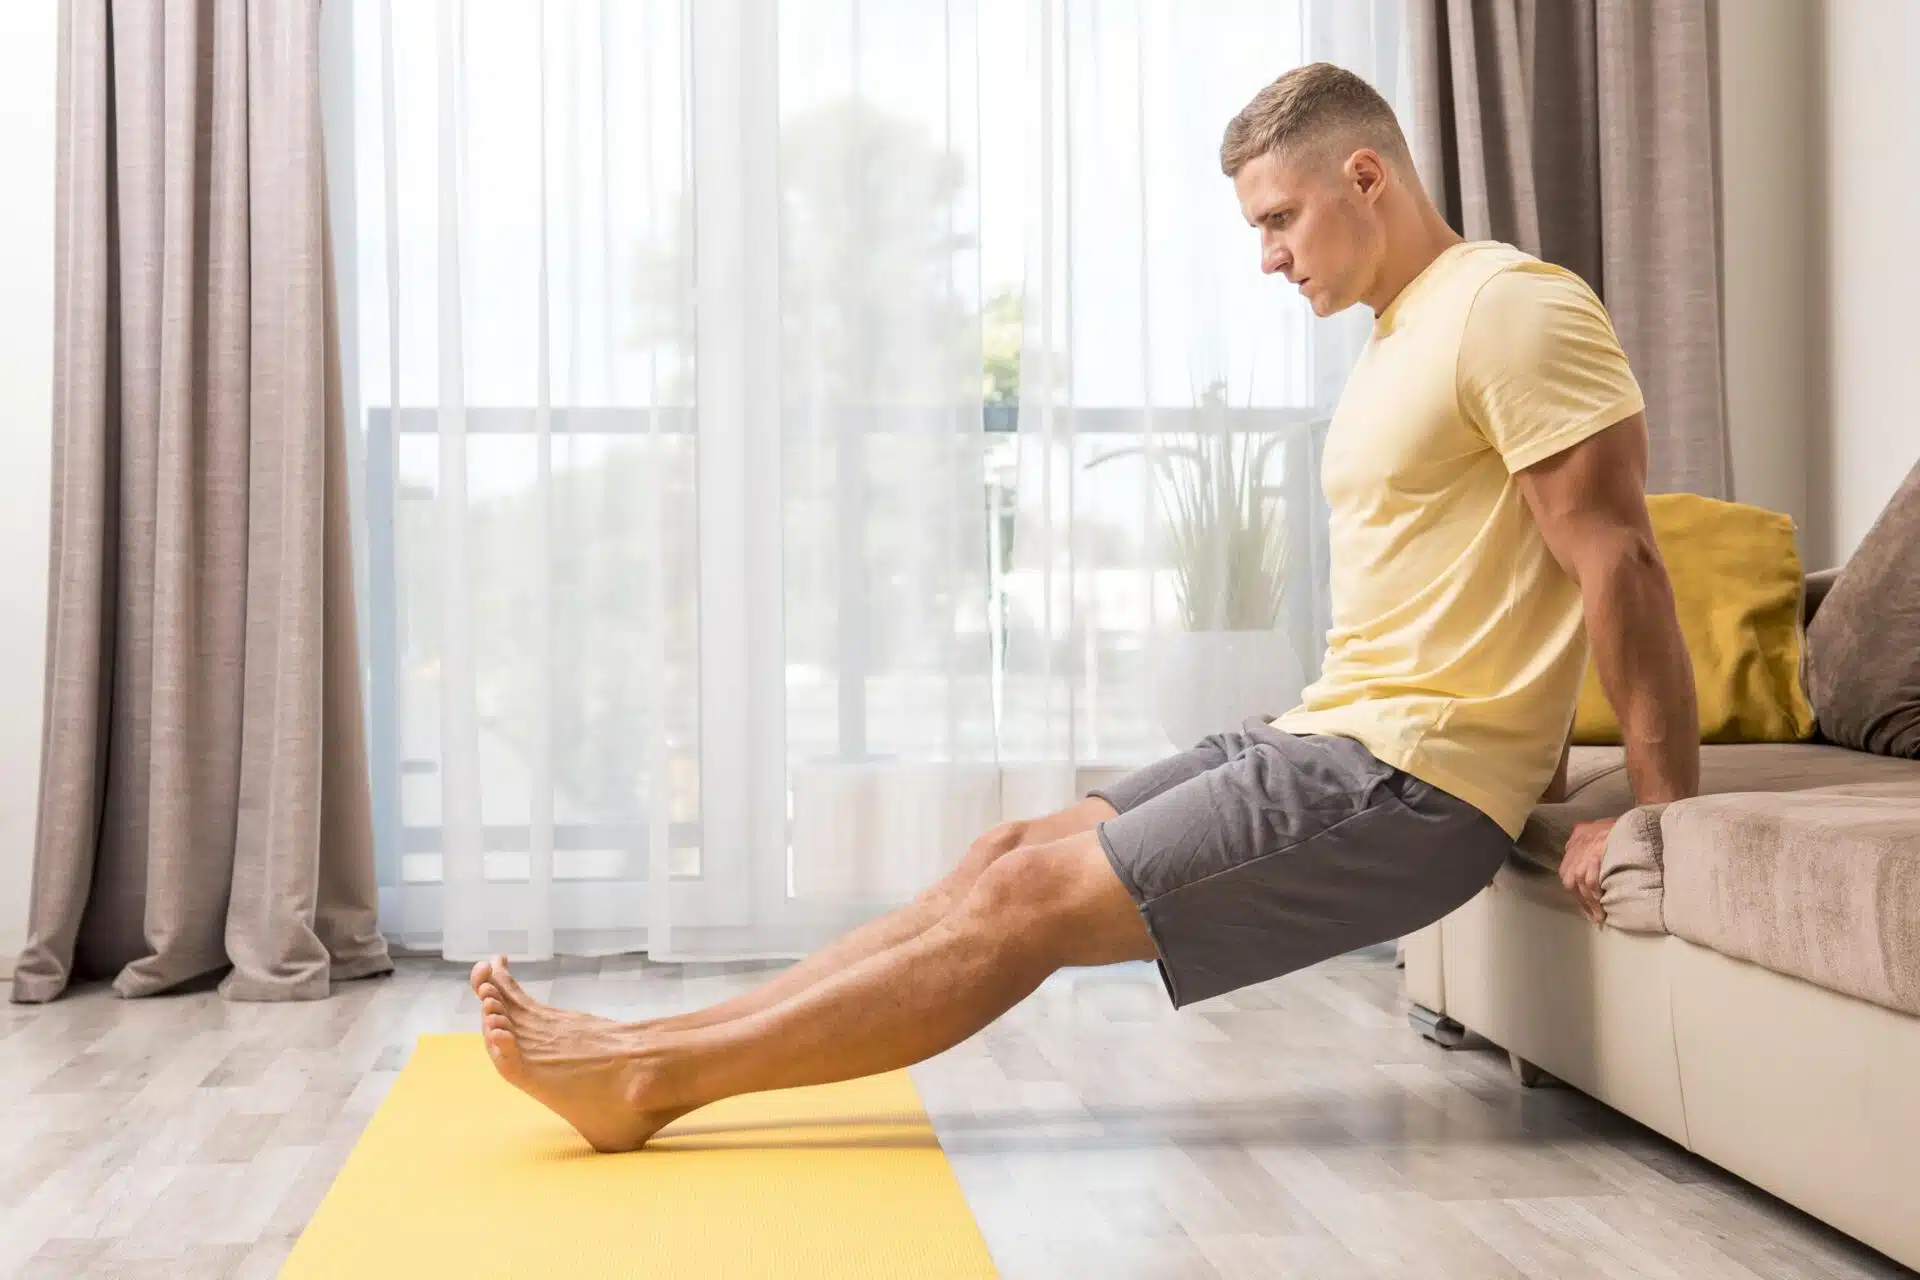 Man doing at-home stretches may counteract summer and foot swelling